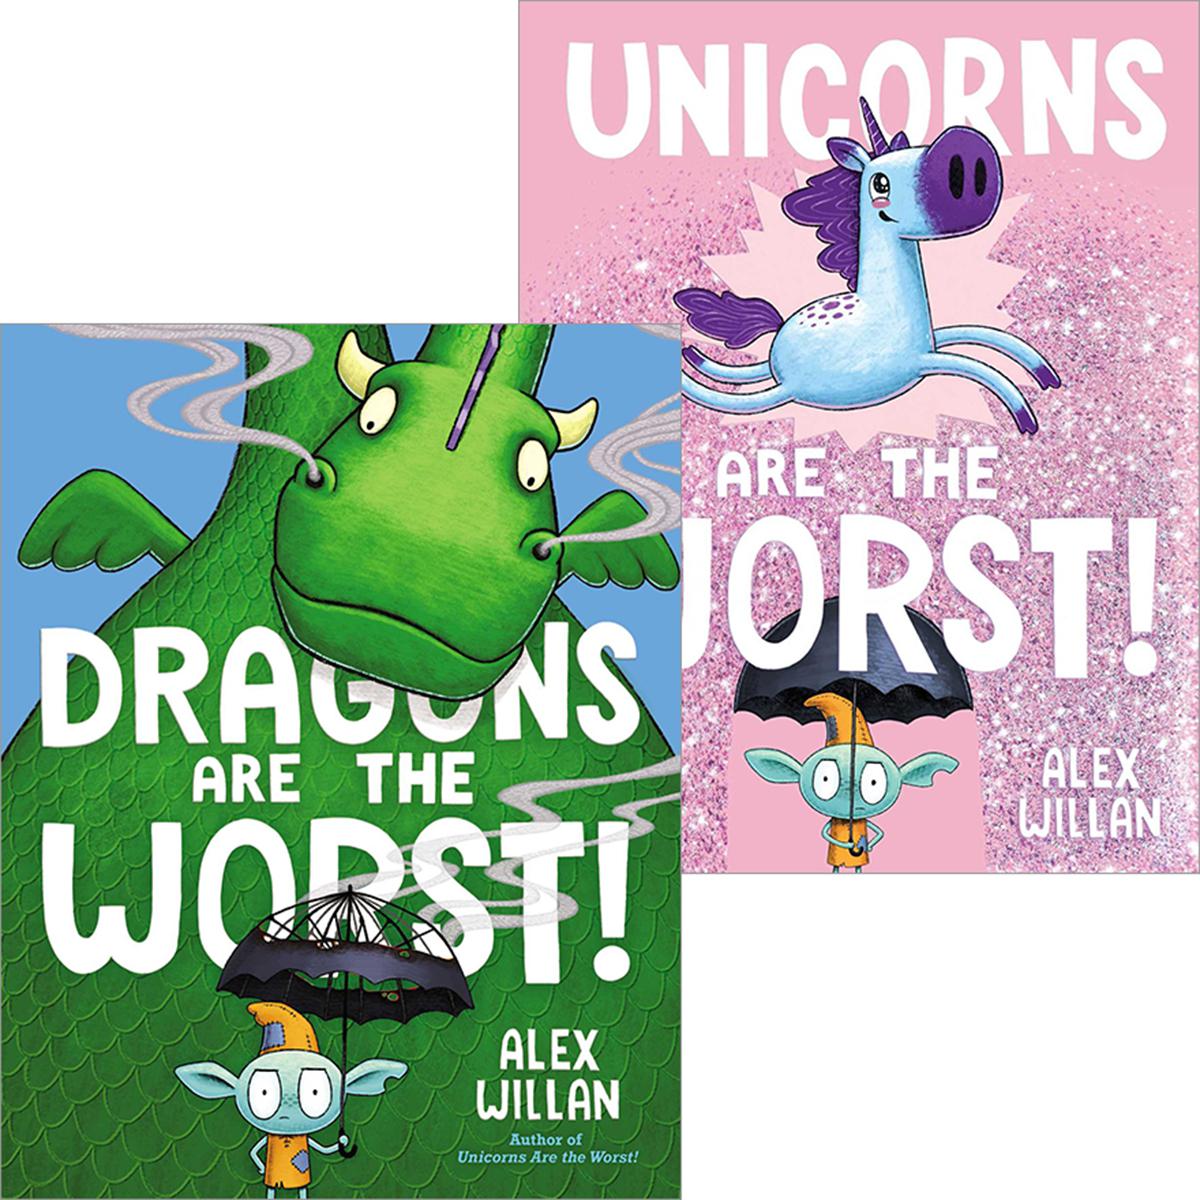  Dragons/Unicorns Are the Worst! Pack 